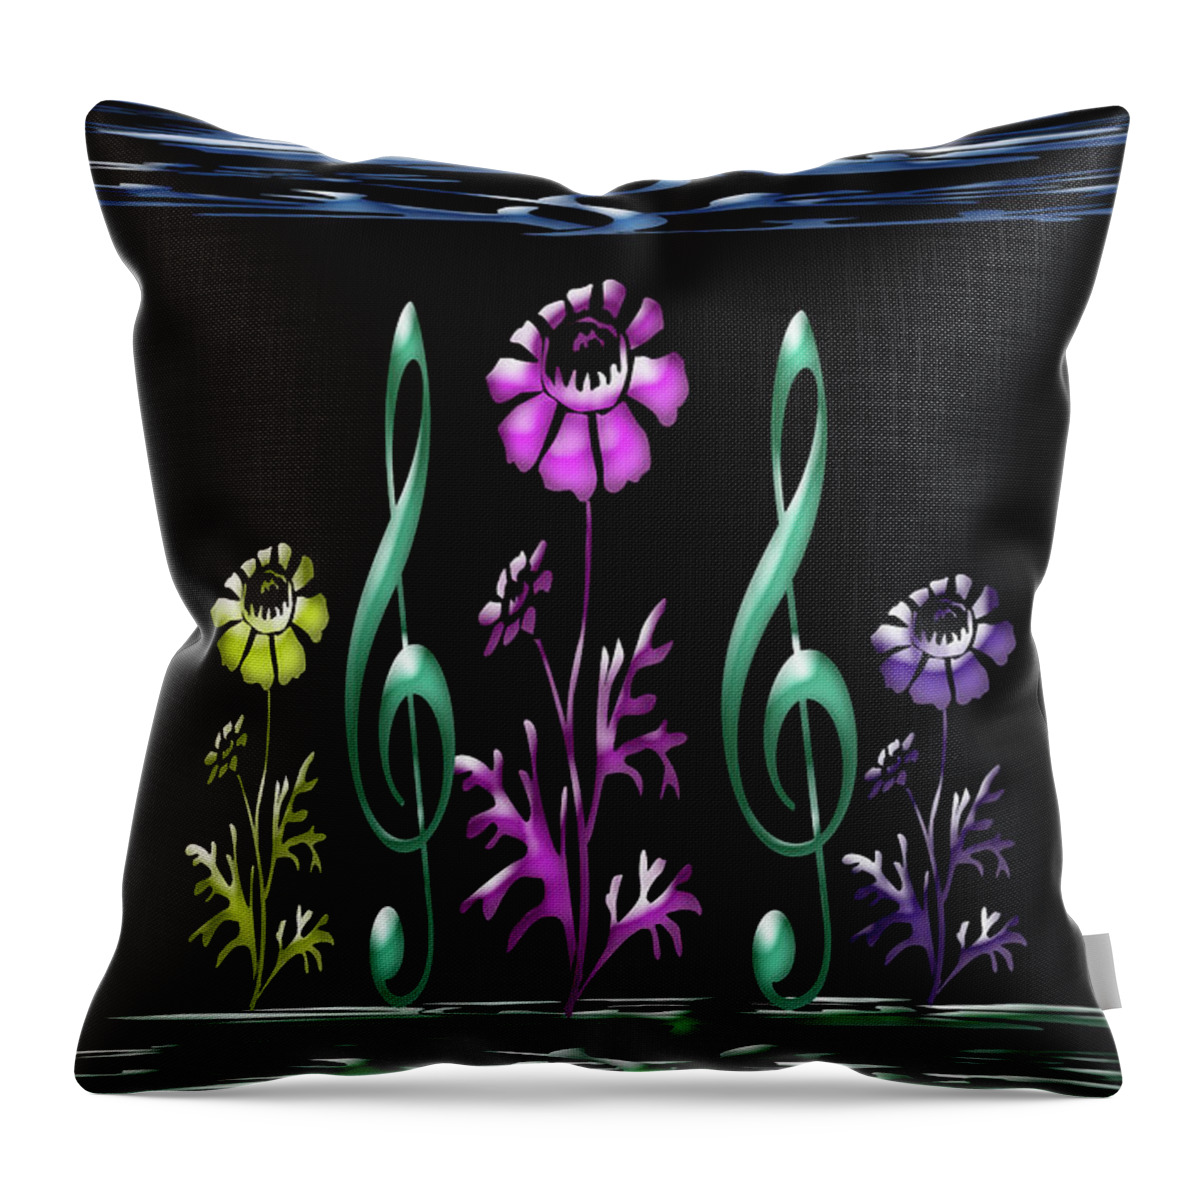 Floral Throw Pillow featuring the digital art Colorful Floral Art by Aimee L Maher ALM GALLERY